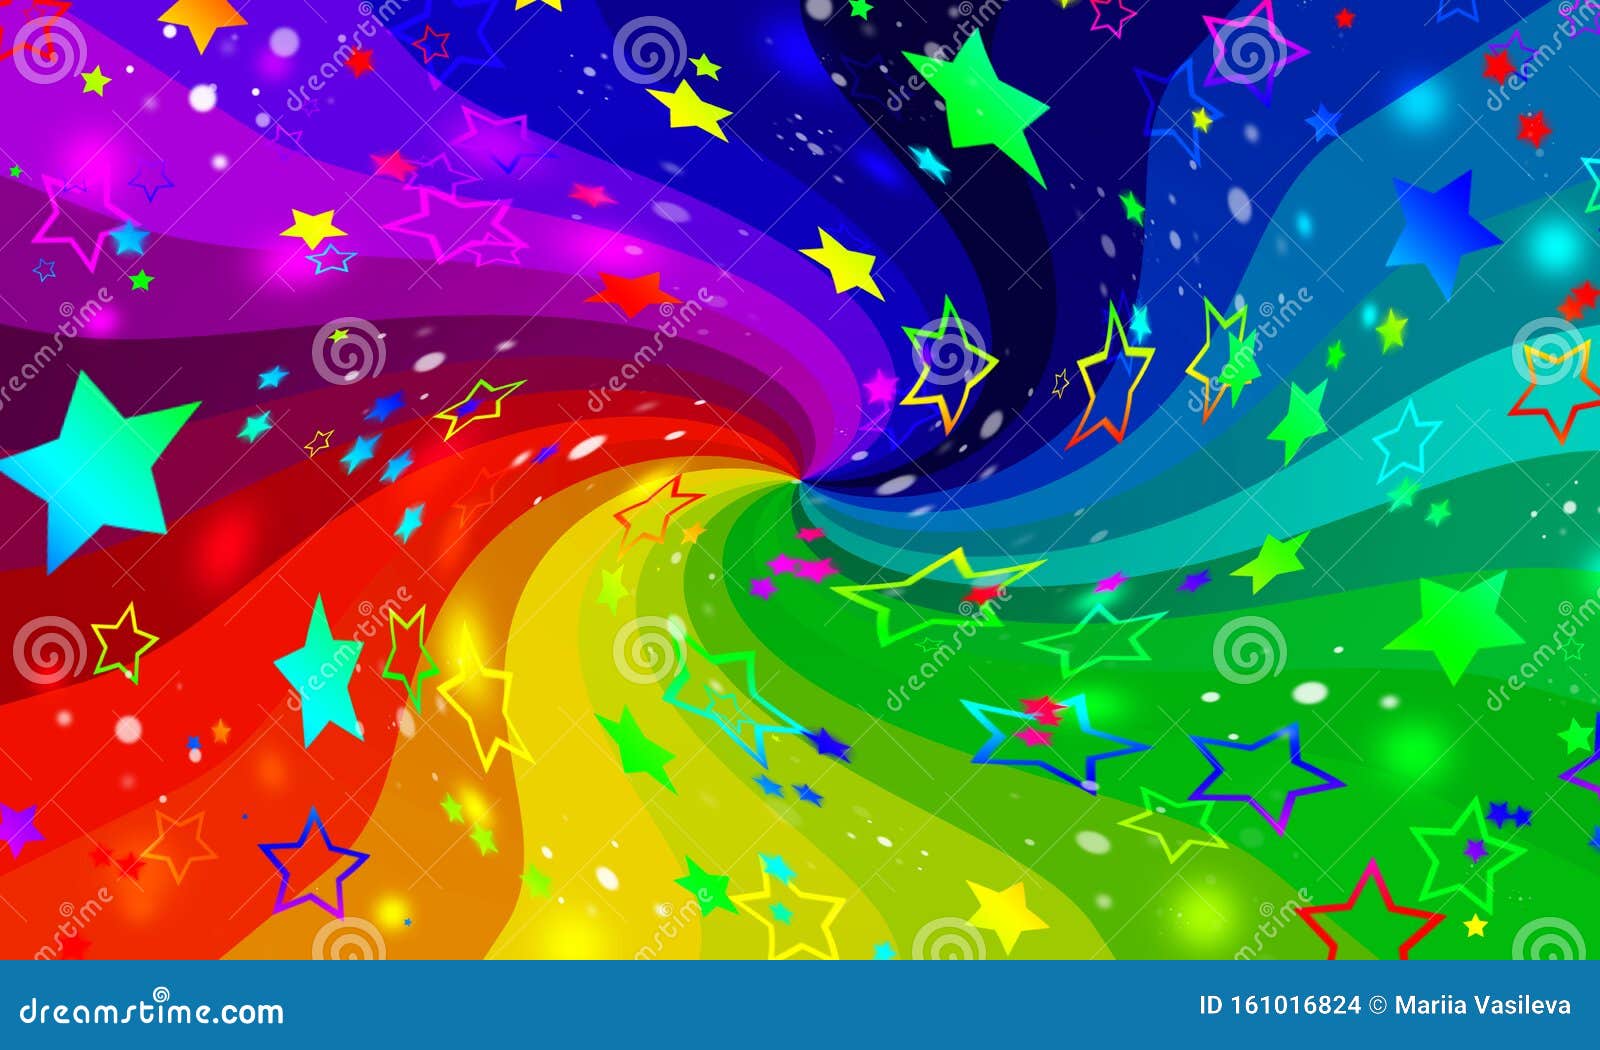 Bright Rainbow Background Colorful Stars Holiday Party Kids Lights Stars Fun Birthday Stock Illustration Illustration Of Graphic Wave 161016824,Dressing Table Design 2020 Simple